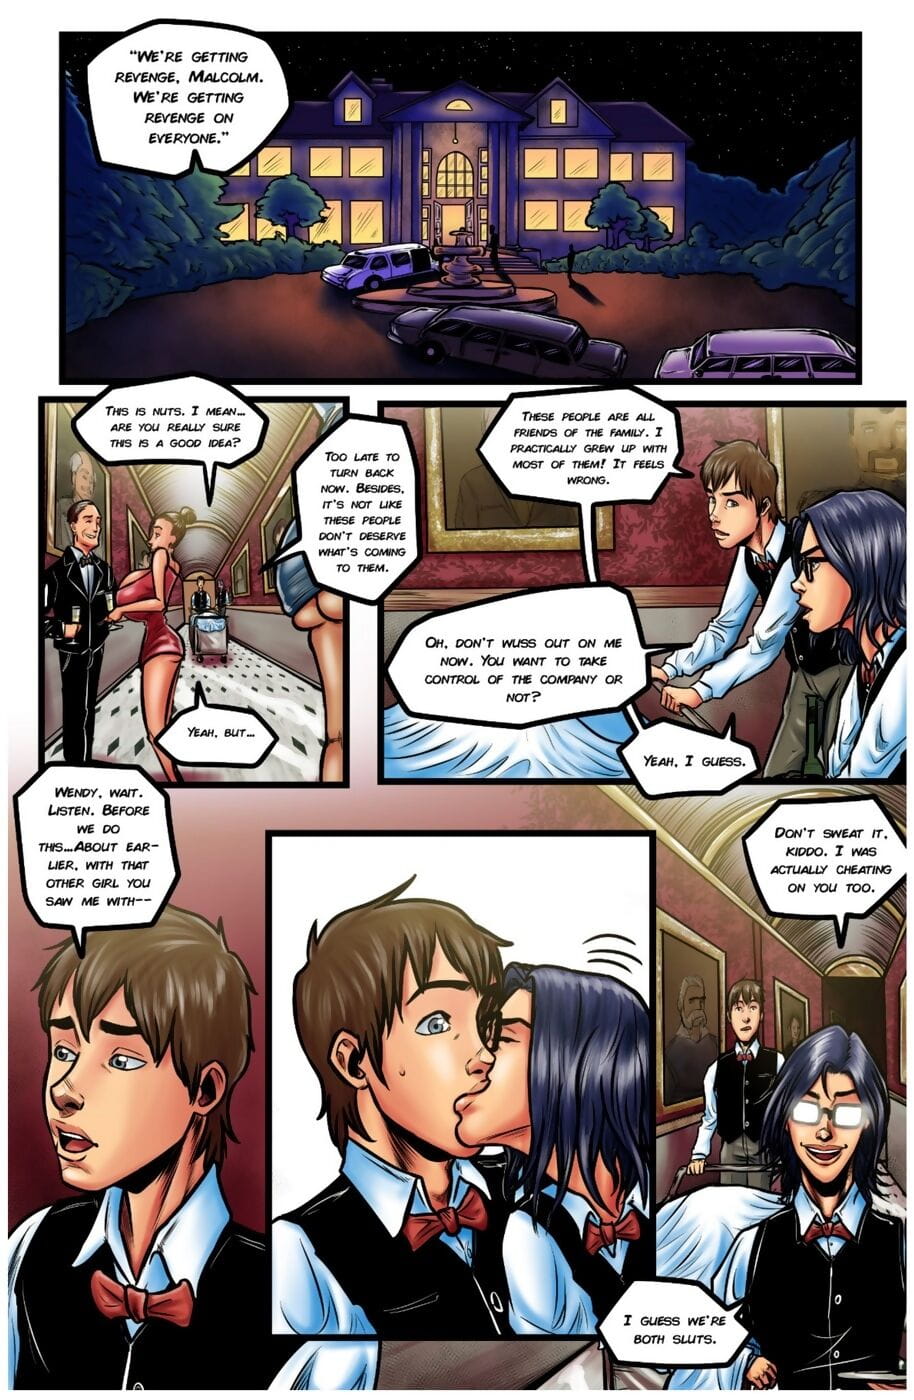 Bot- Seduction Technology Issue 4 page 1